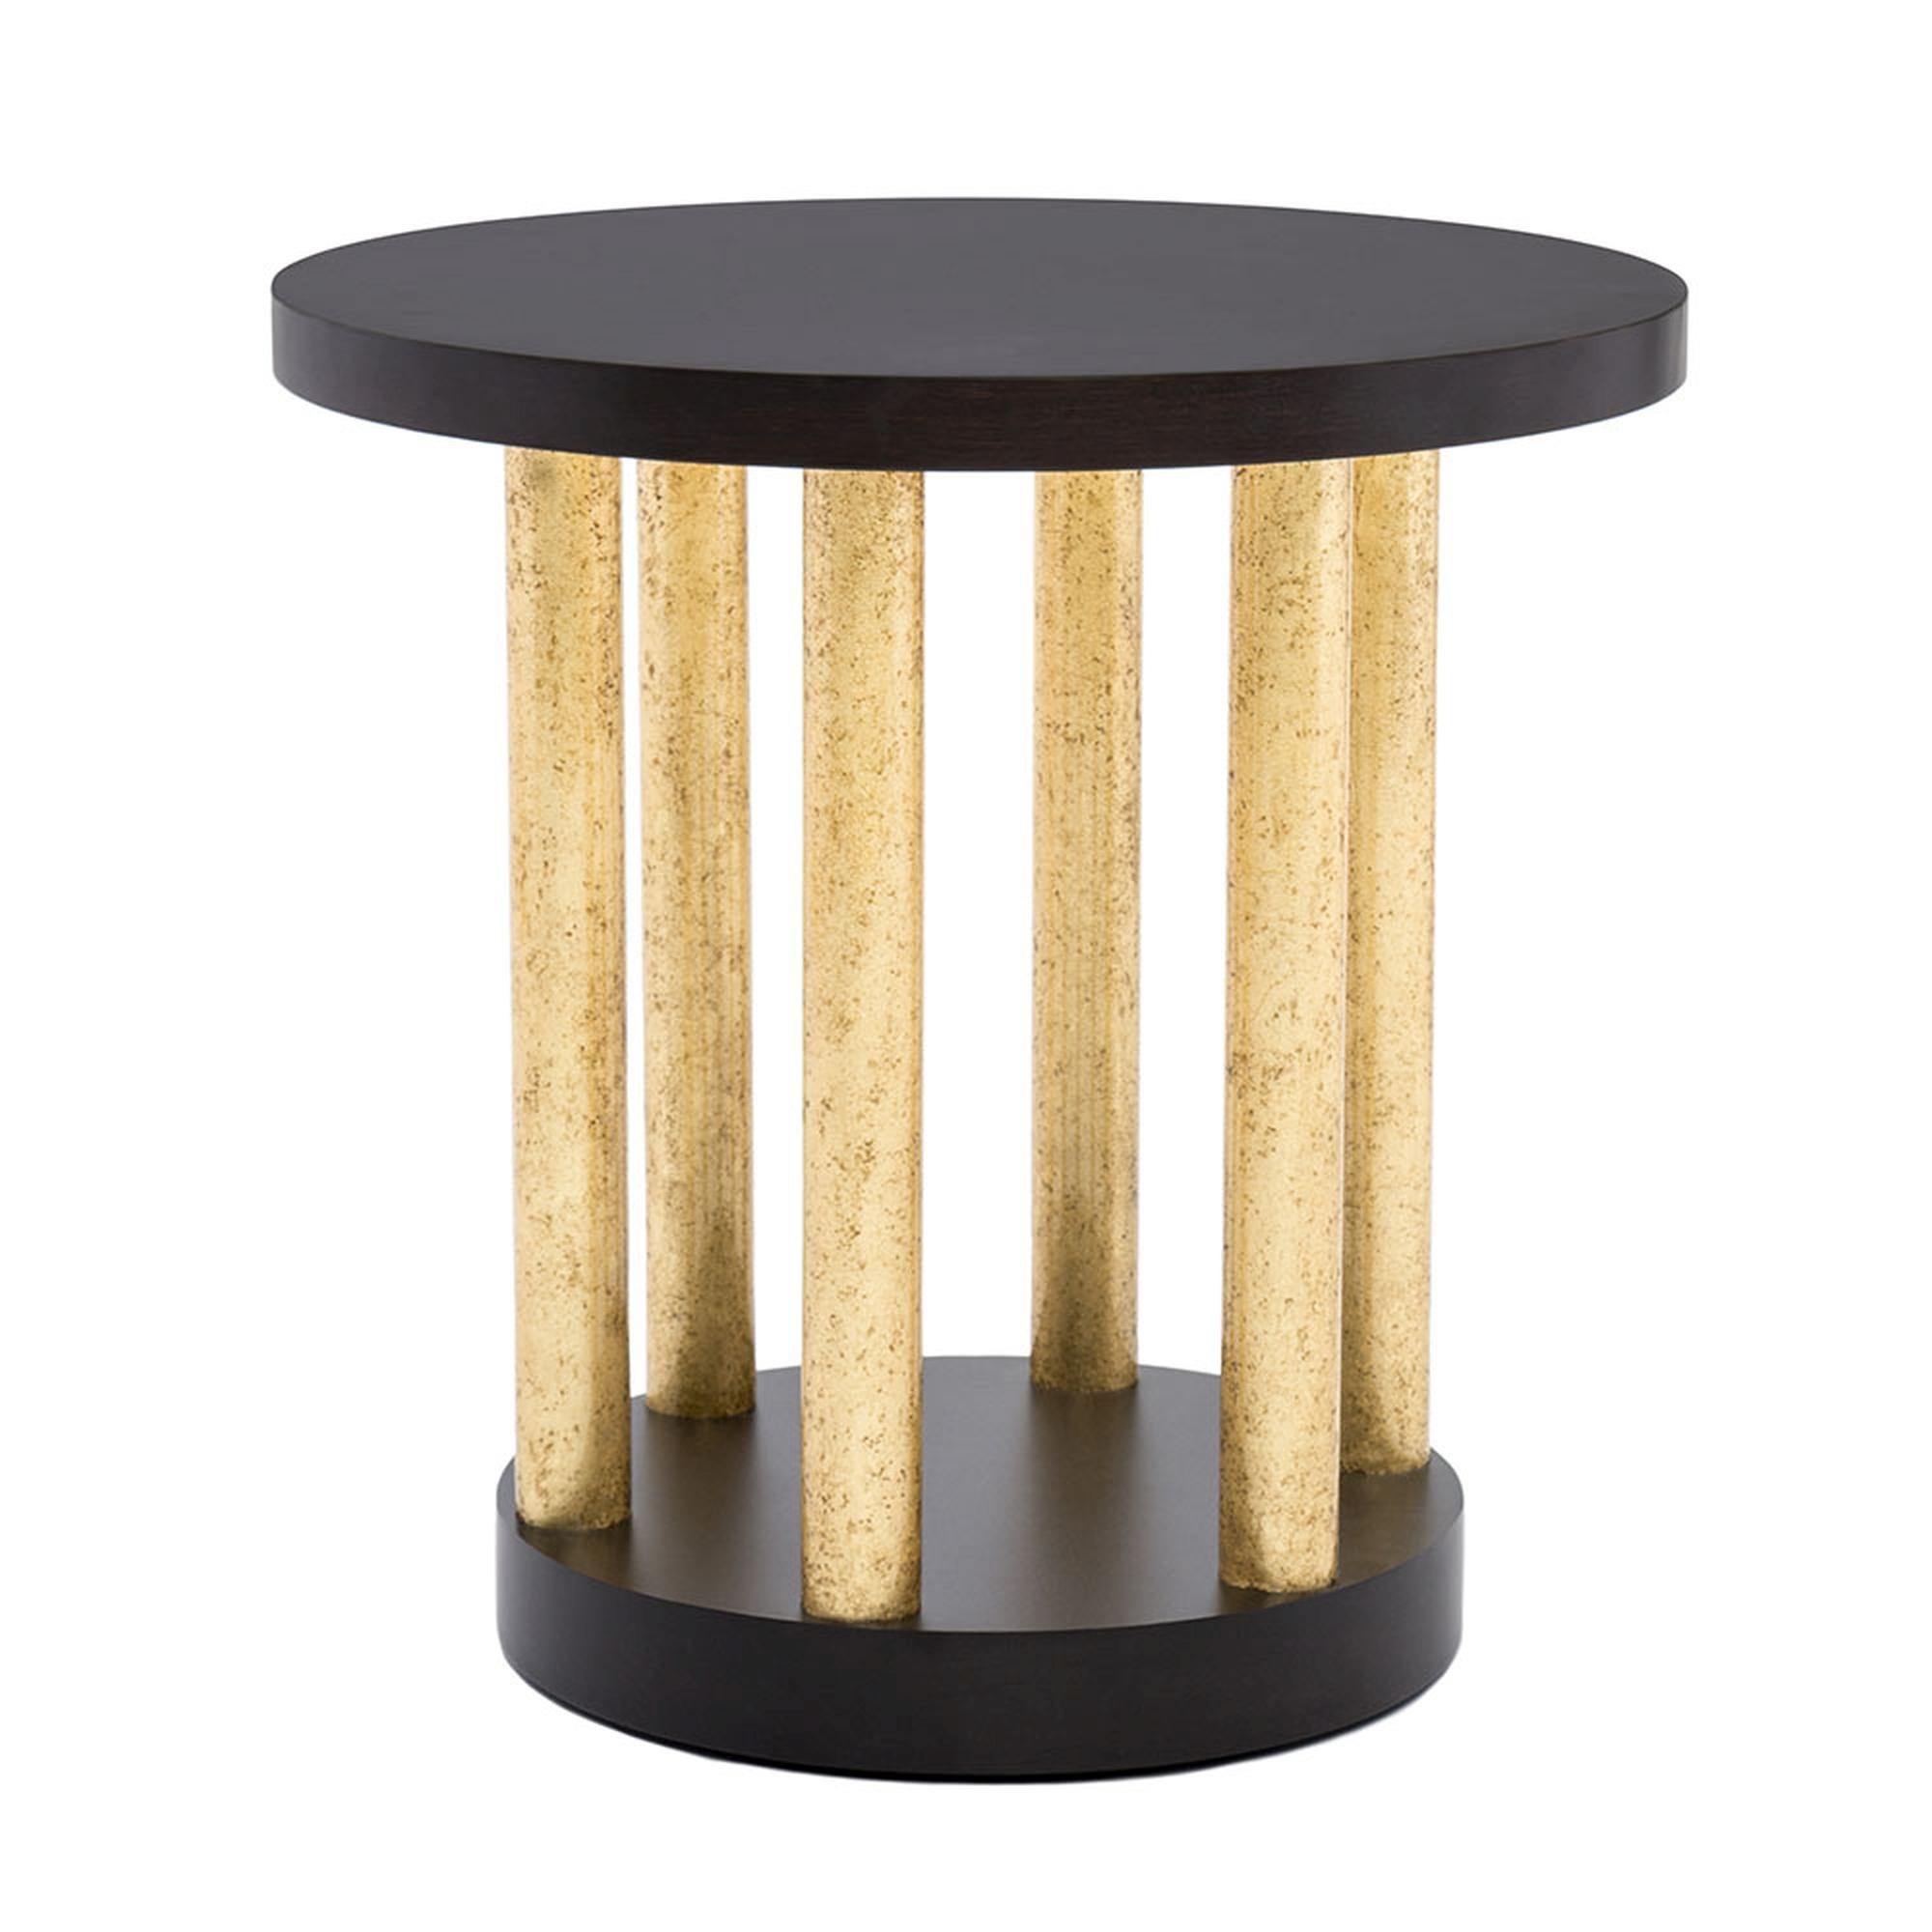 Bel Air Accent Table II in Chocolate and Antiqued Gold by Innova Luxuxy Group For Sale